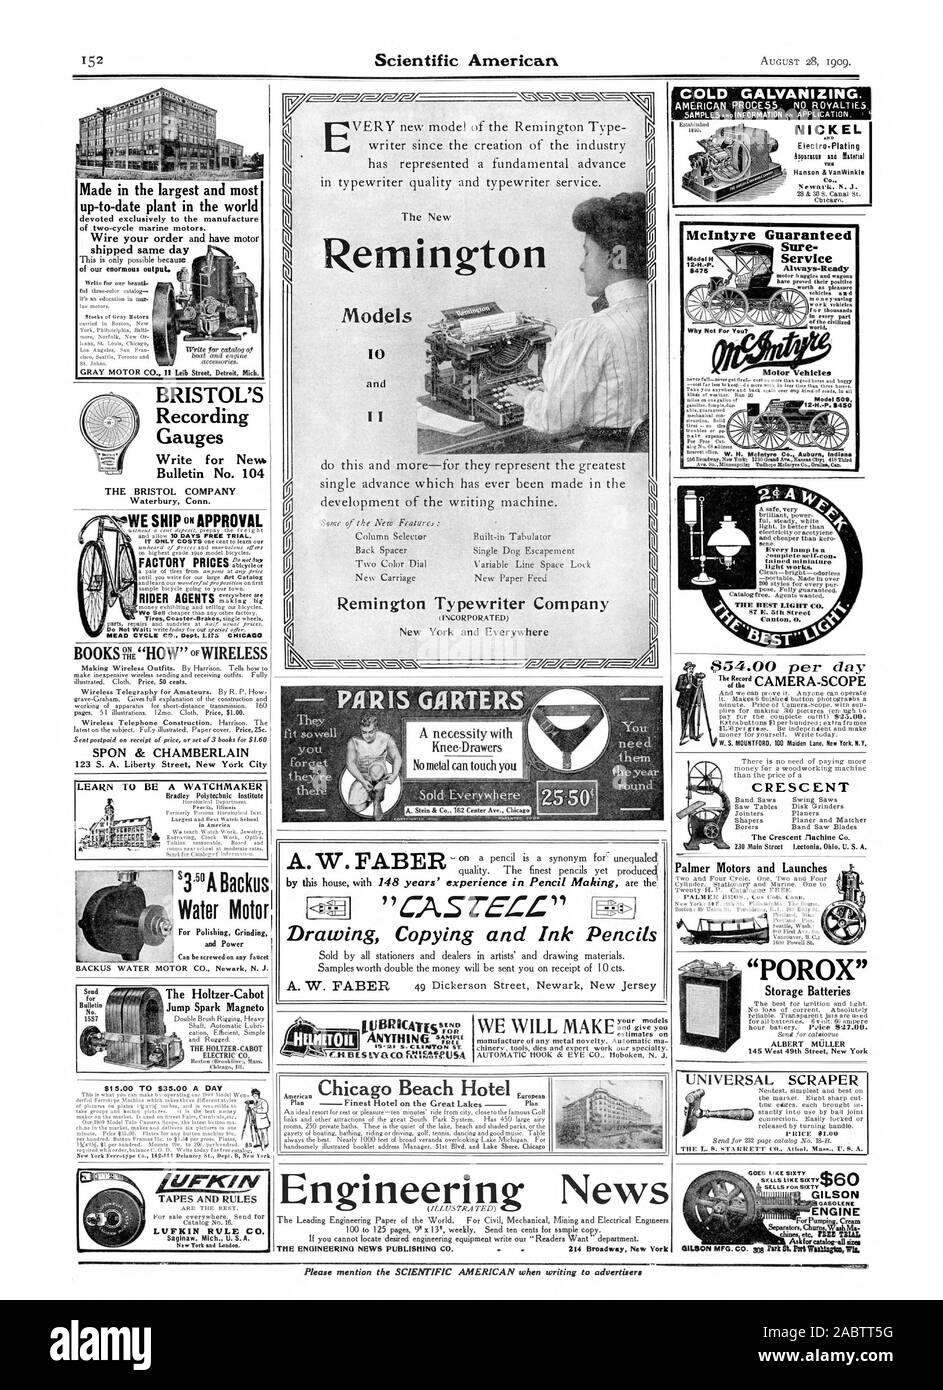 Remington date of manufacture